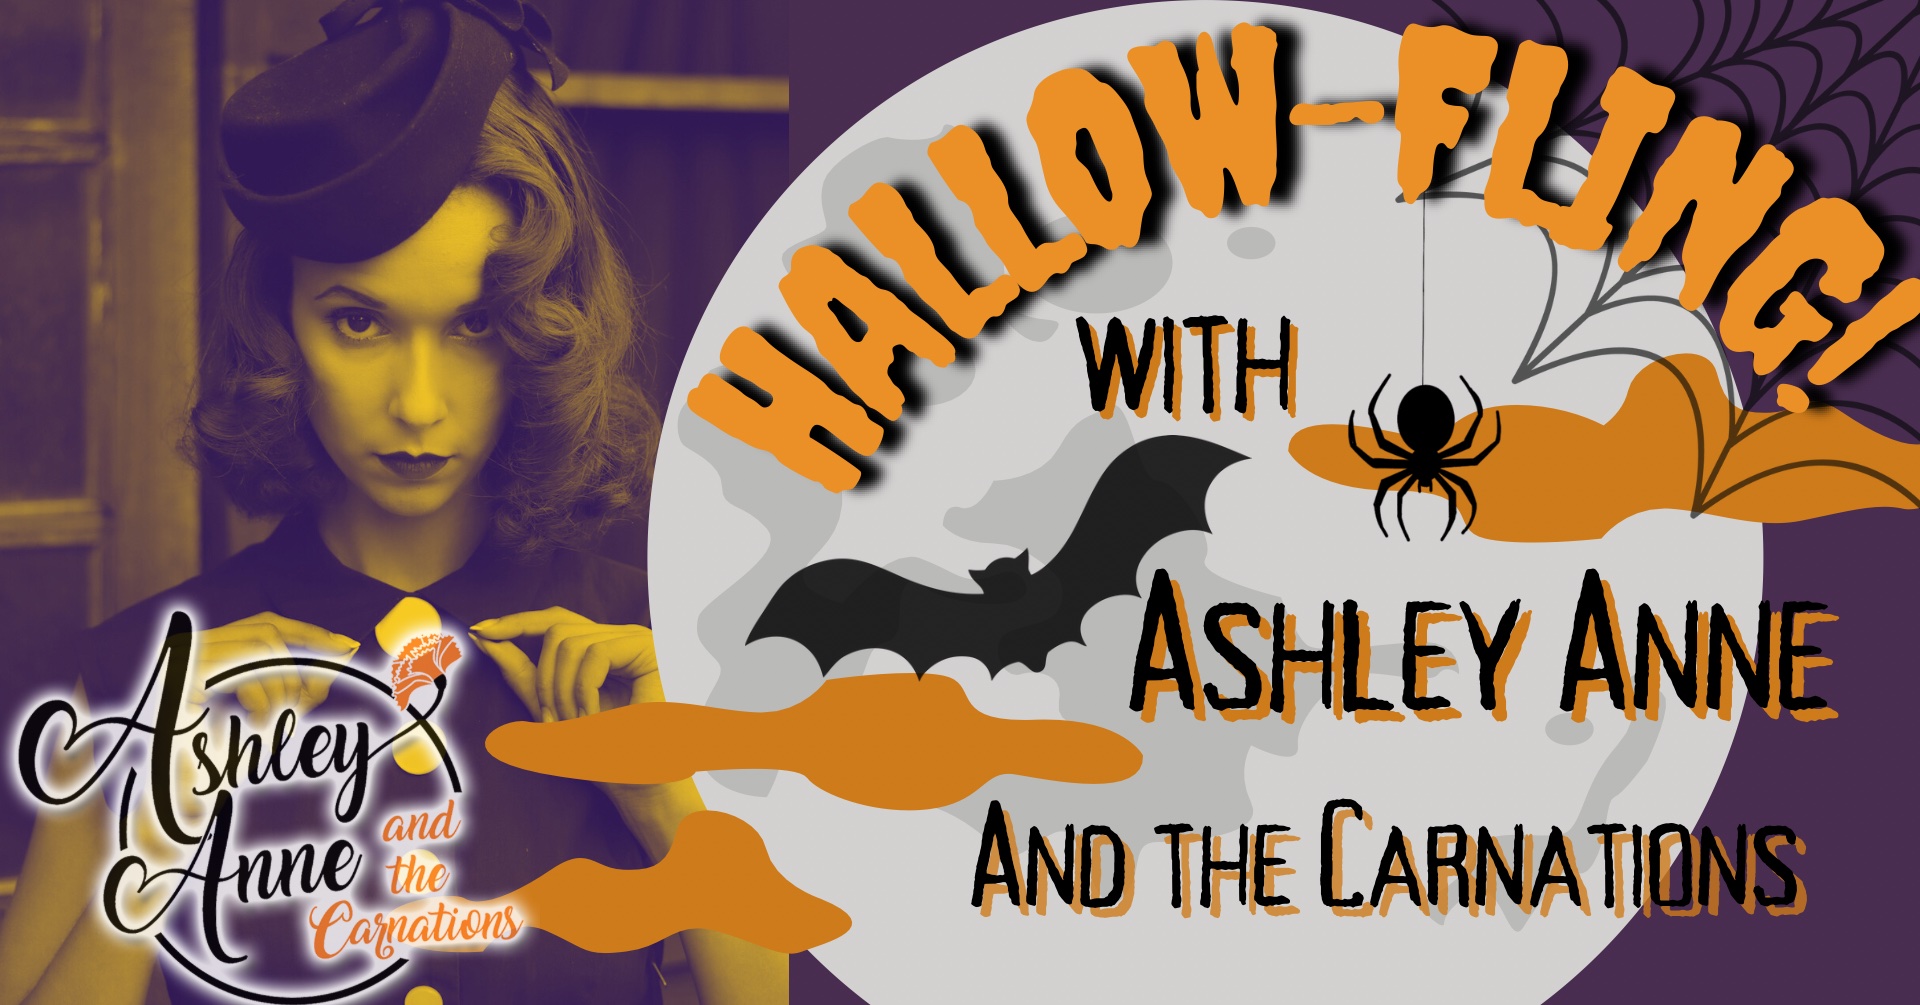 HALLOW-FLING with ASHLEY ANNE AND THE CARNATIONS and DJ VINTAGE PETE!